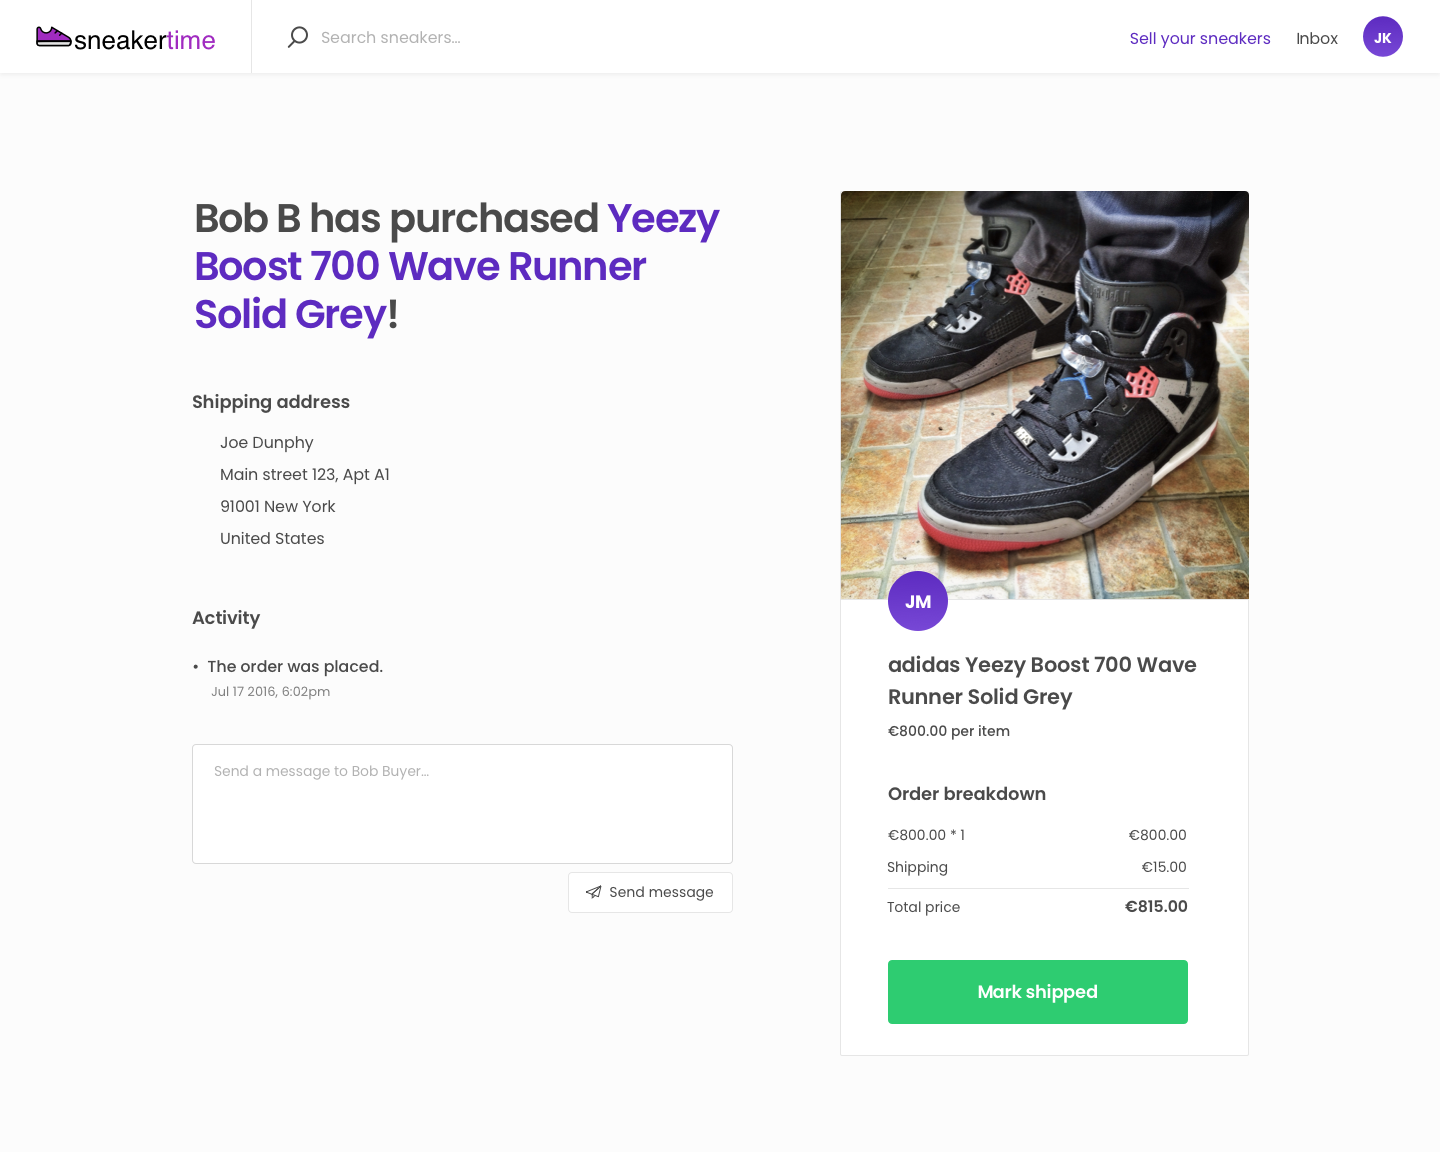 Sneakertime transaction page, provider’s view